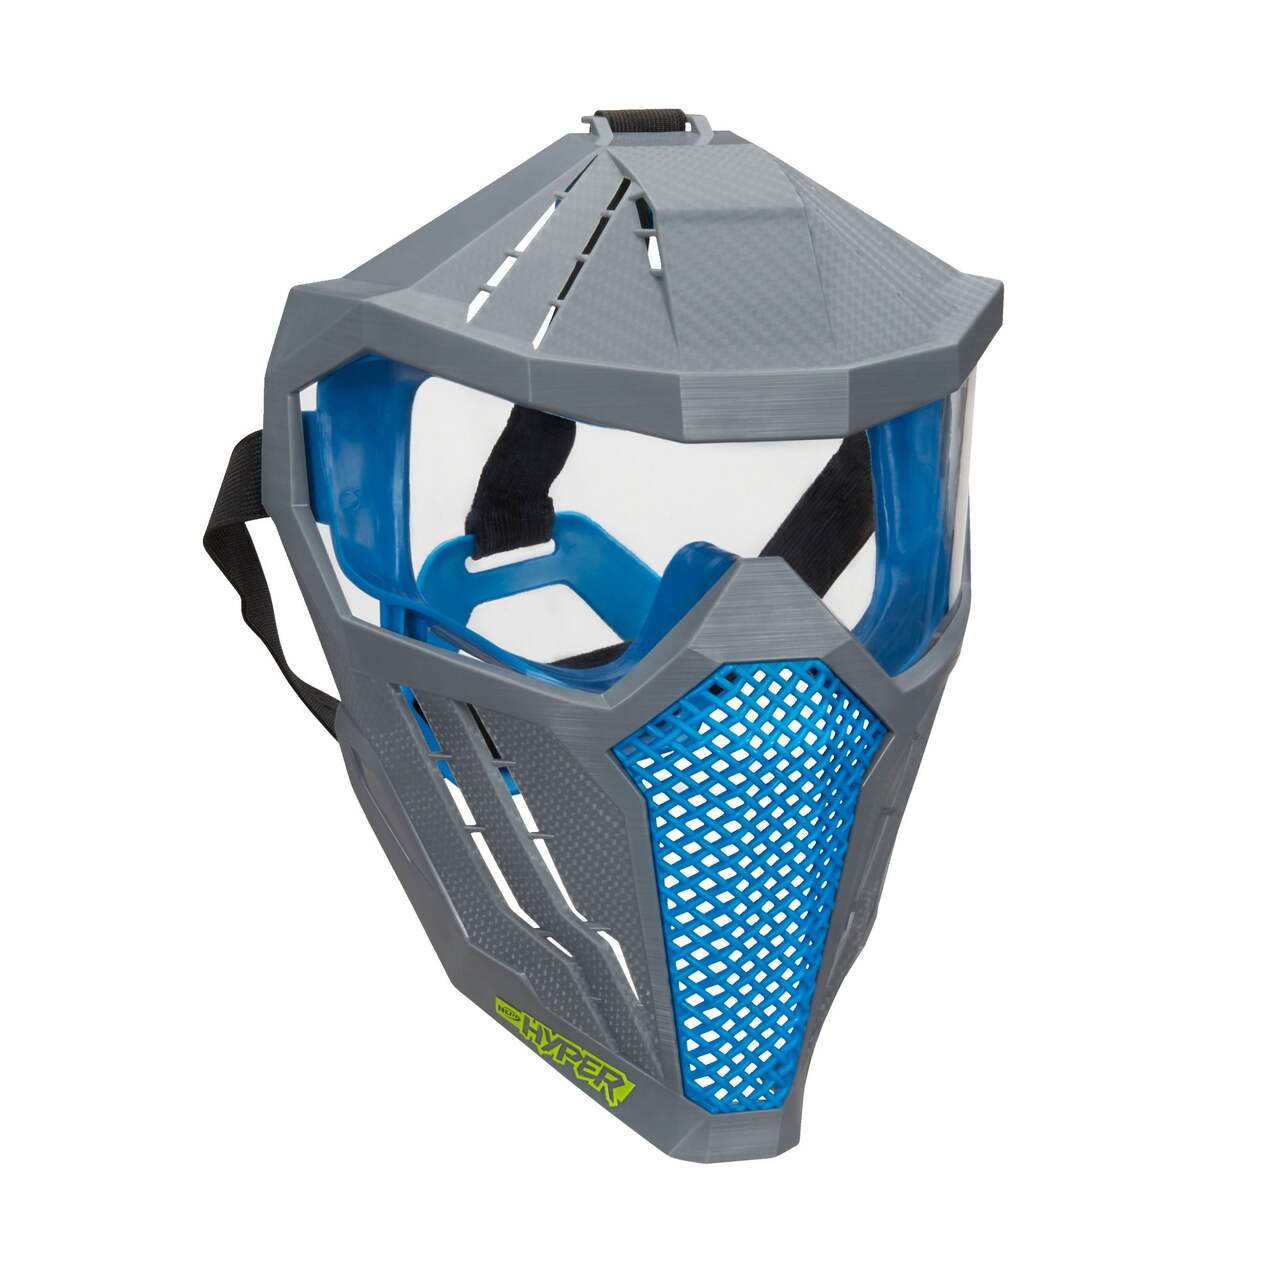 https://media-www.canadiantire.ca/product/seasonal-gardening/toys/toys-games/0508079/nerf-hyper-face-mask-assorted-c21f46be-52f0-4572-a7a6-ce0d0f212145-jpgrendition.jpg?imdensity=1&imwidth=1244&impolicy=mZoom